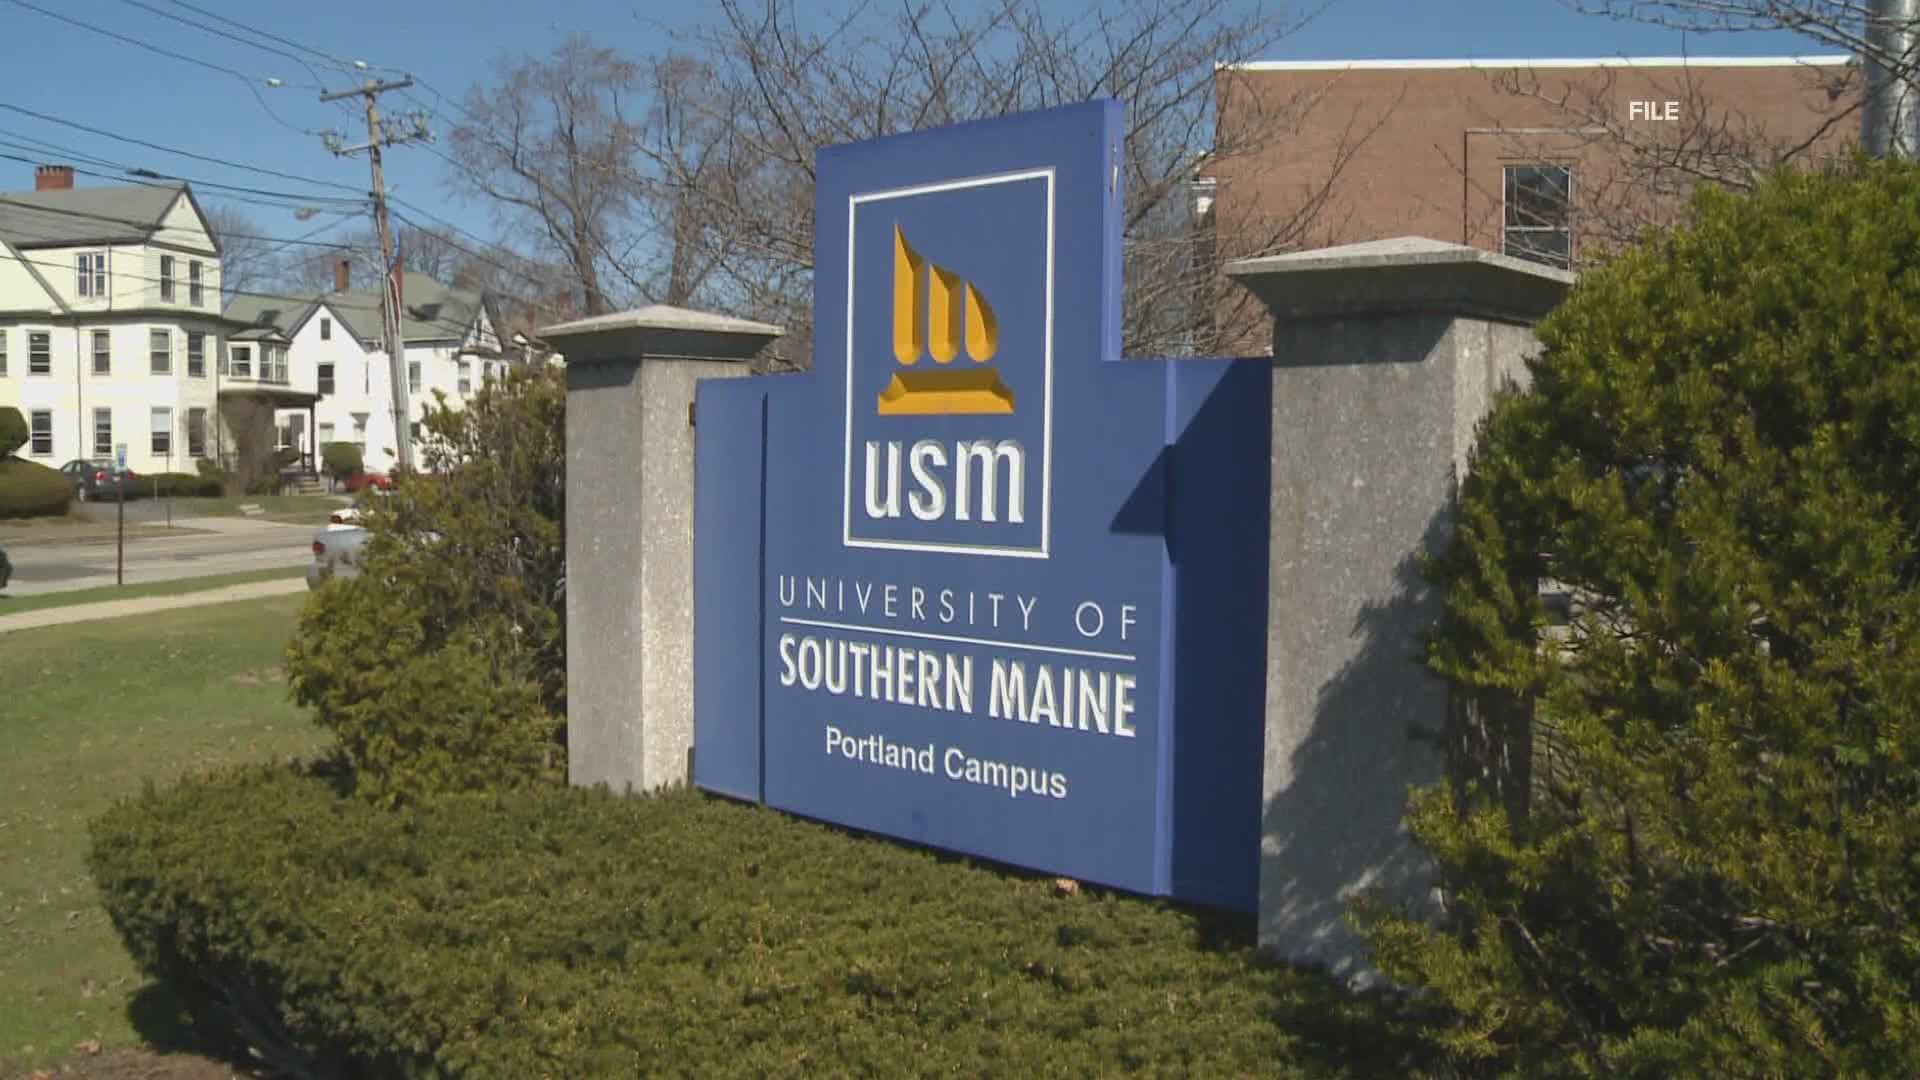 The University of Southern Maine announced today that there are now two confirmed cases of Covid-19 on campus.